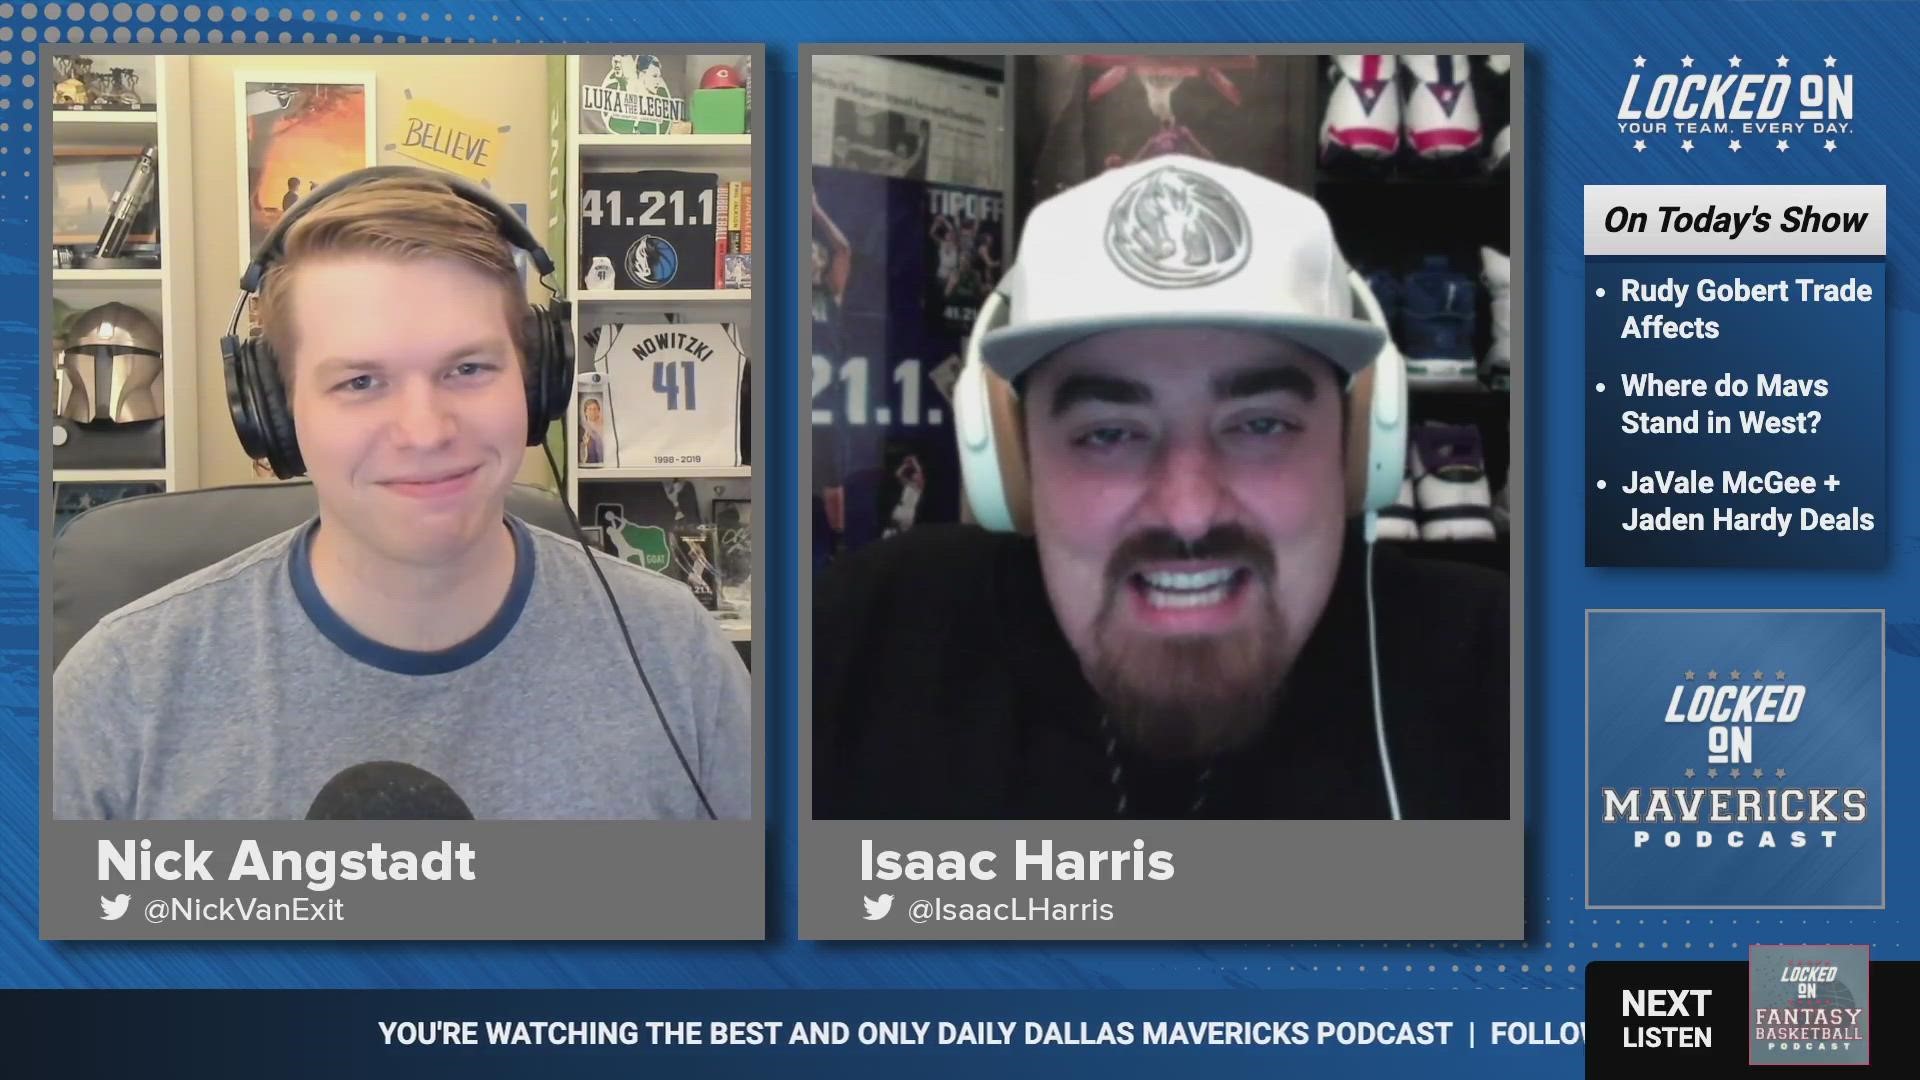 Nick Angstadt & Isaac Harris discuss the JaVale McGee & Jaden Hardy signing news and why it's so good for the Mavs. Then they discuss the Rudy Gobert trade.